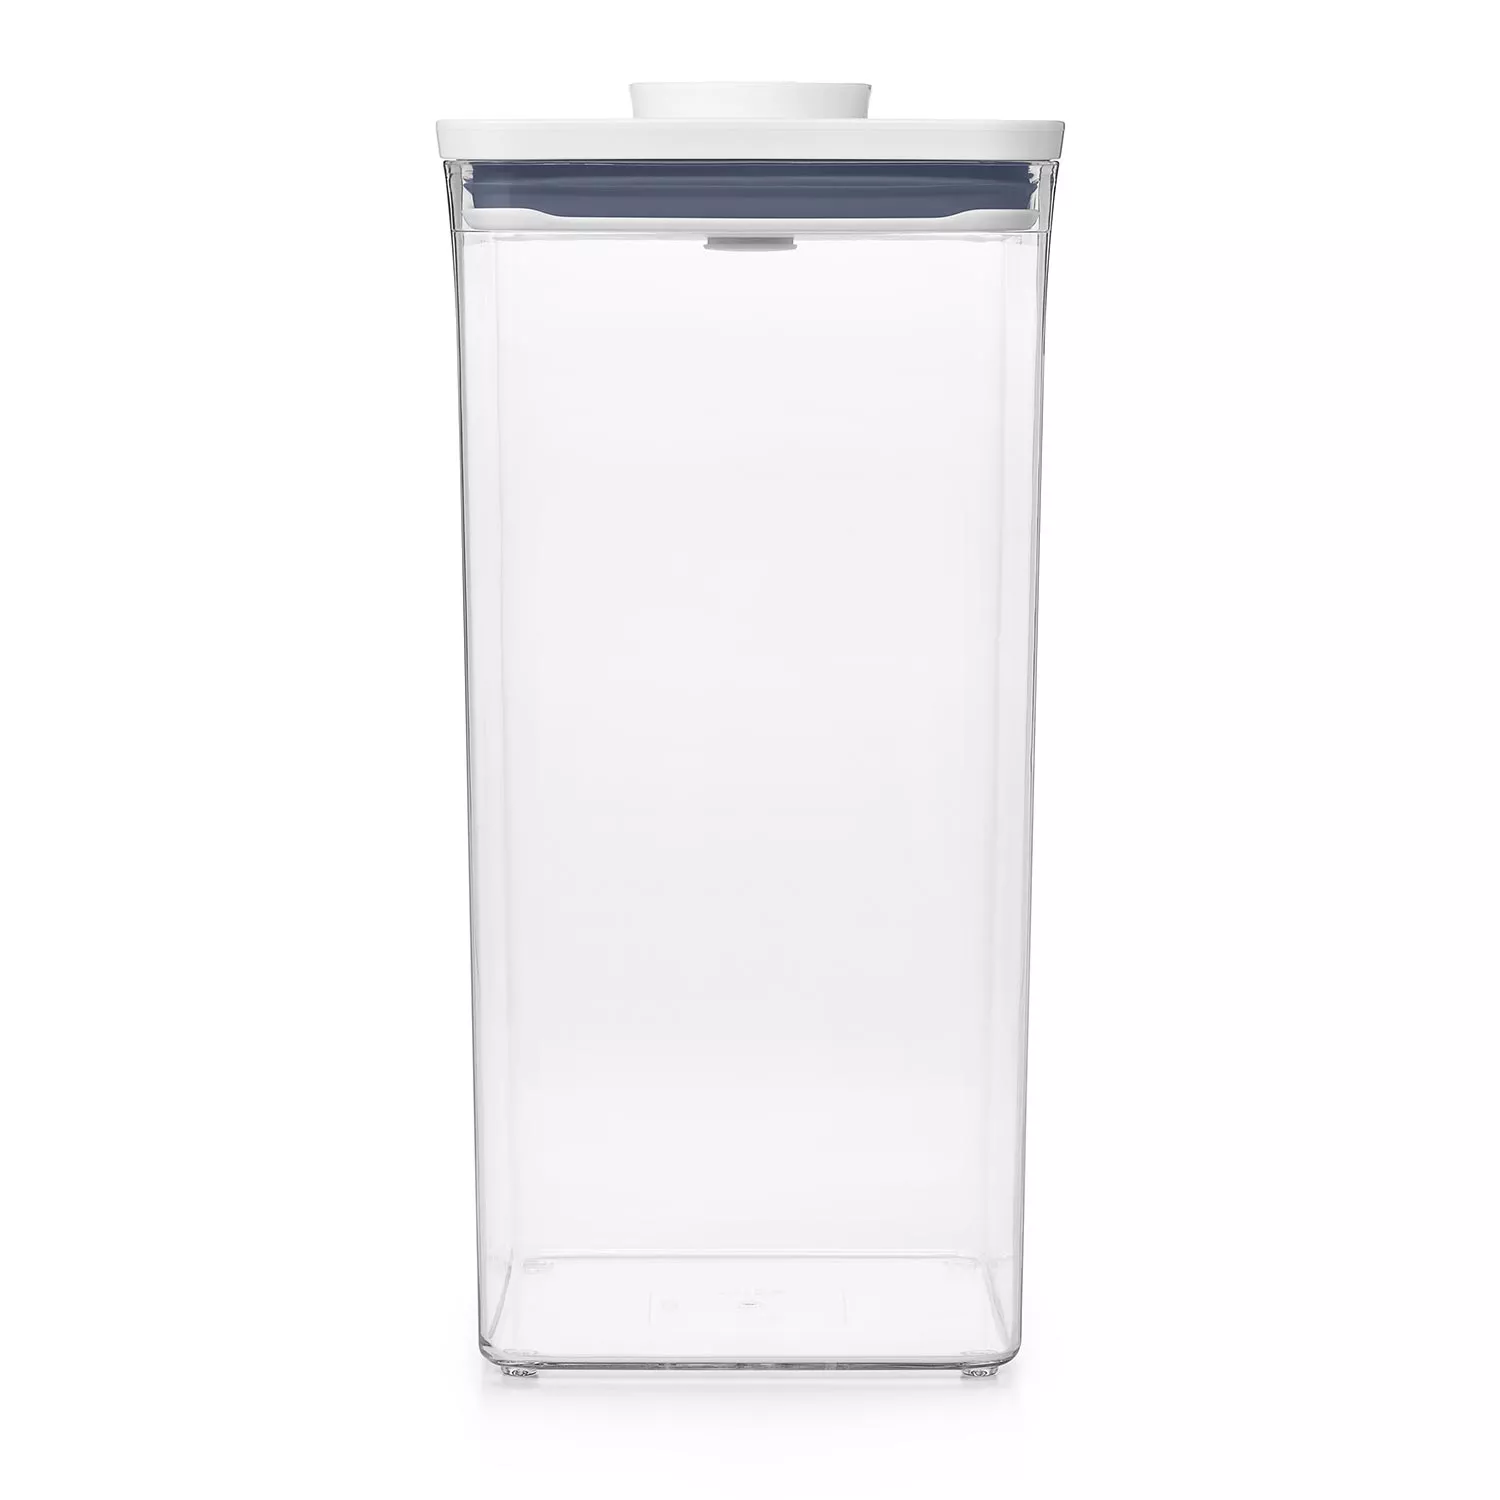 OXO Good Grips Big Square Tall POP Container 6 Qt.